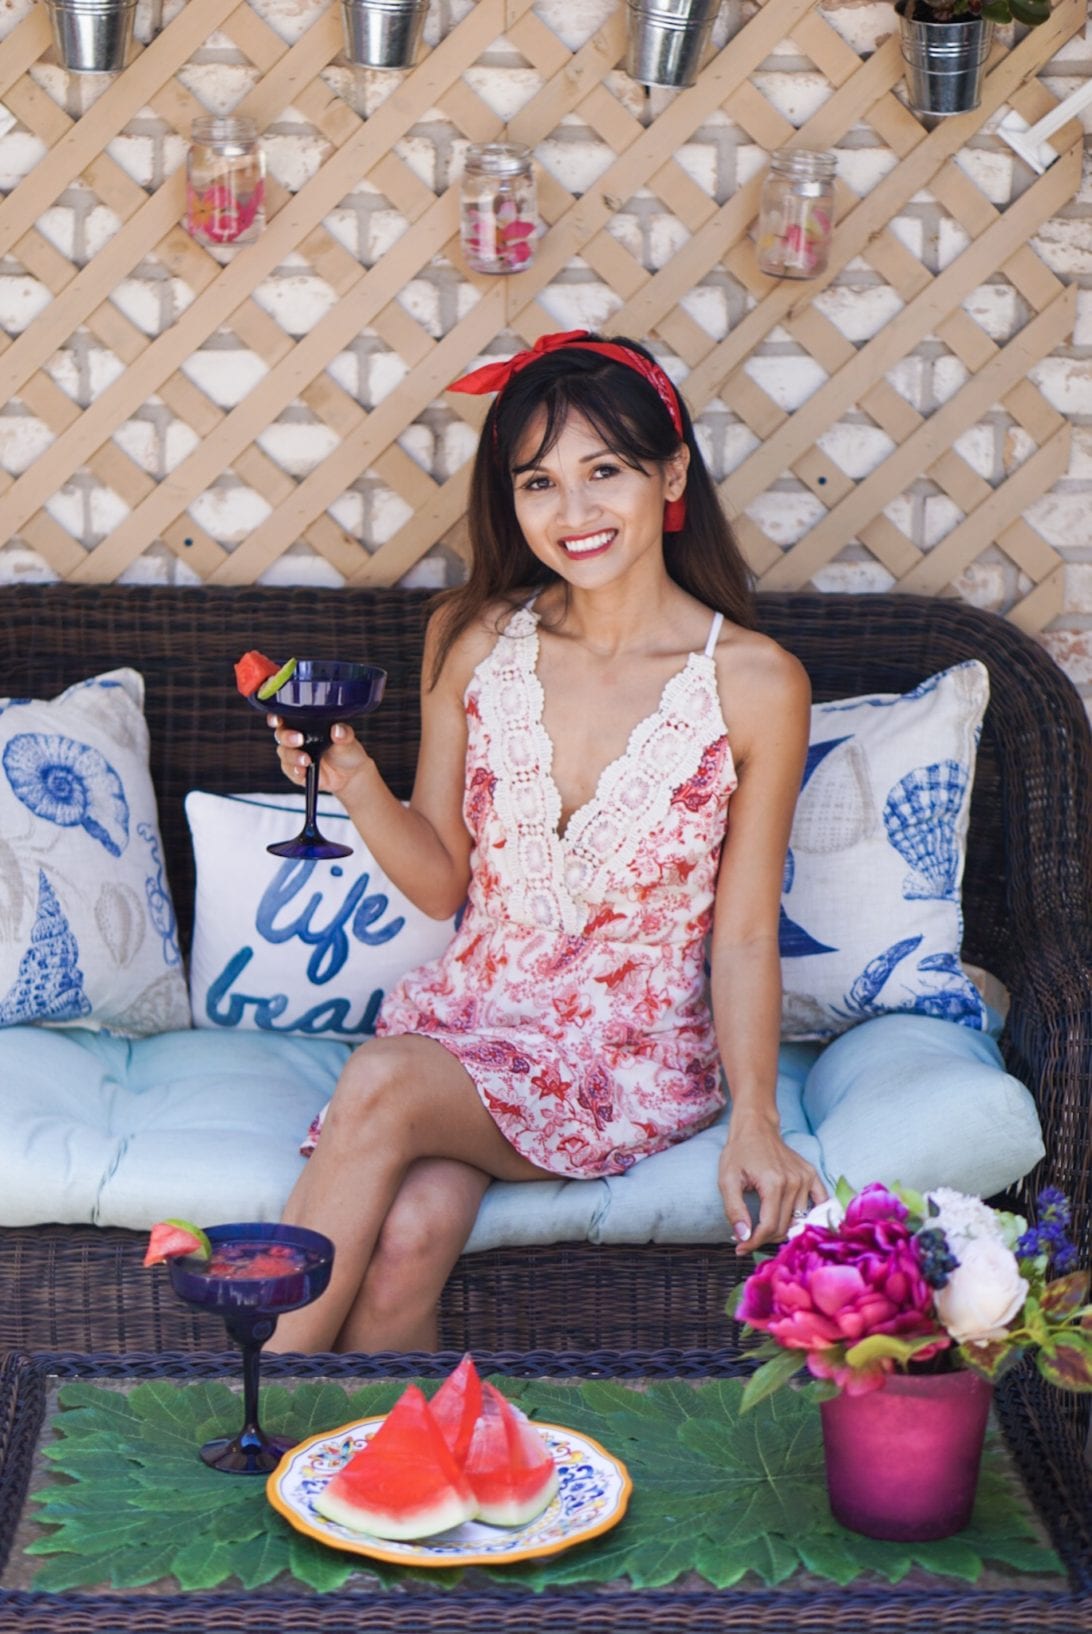 5 Tips to Get Your Summer Patio Ready with Pier 1 Imports by Houston blogger Dawn P. Darnell